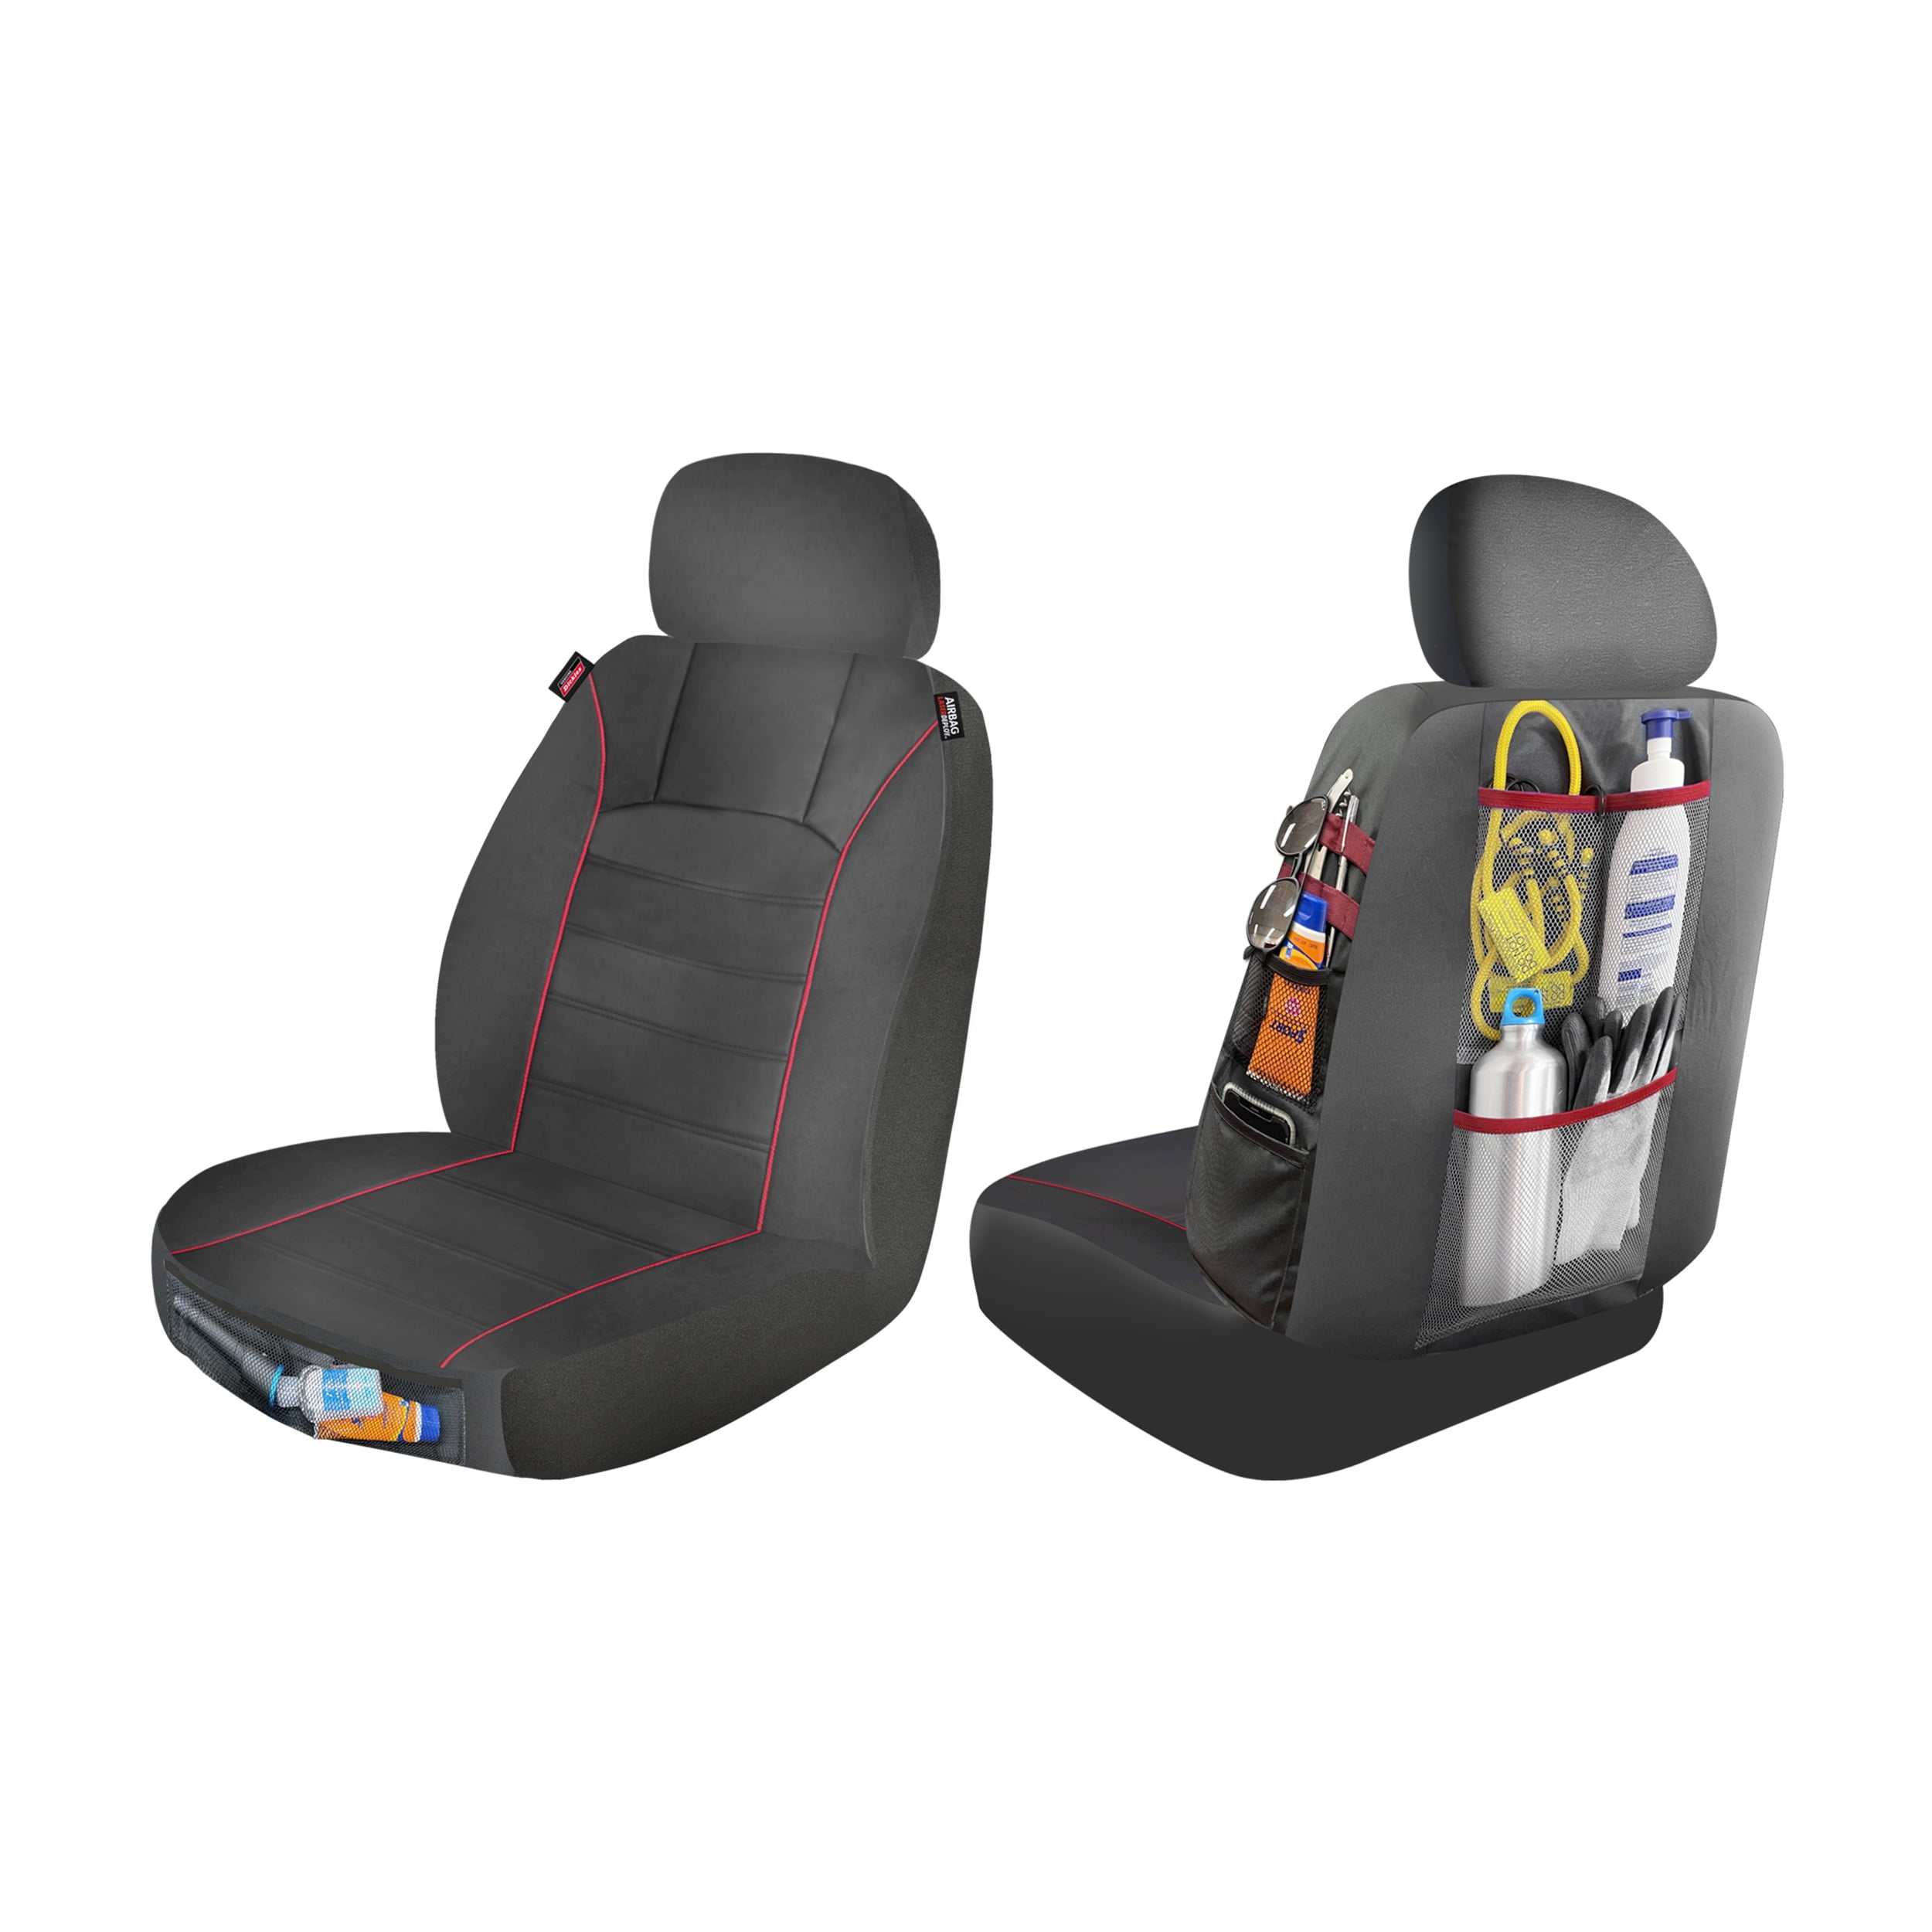 Best Child Car Seat Protector Covers Baby Spills and Stains Includes Storage Pockets 